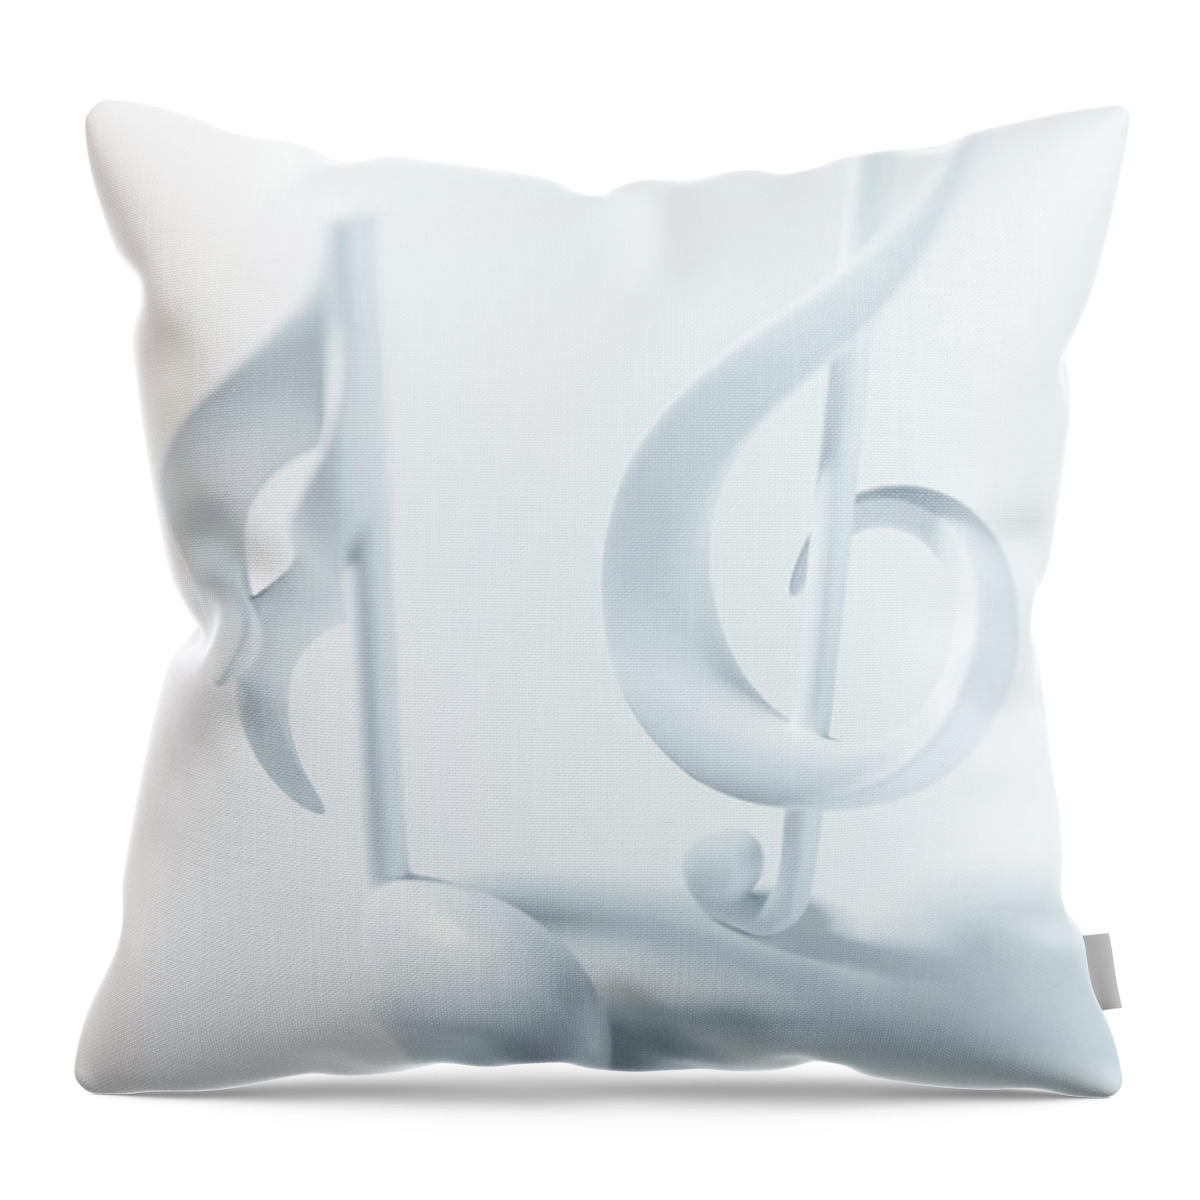 White Background Throw Pillow featuring the photograph Close Up Of Semiquaver And Treble Clef by Adam Gault